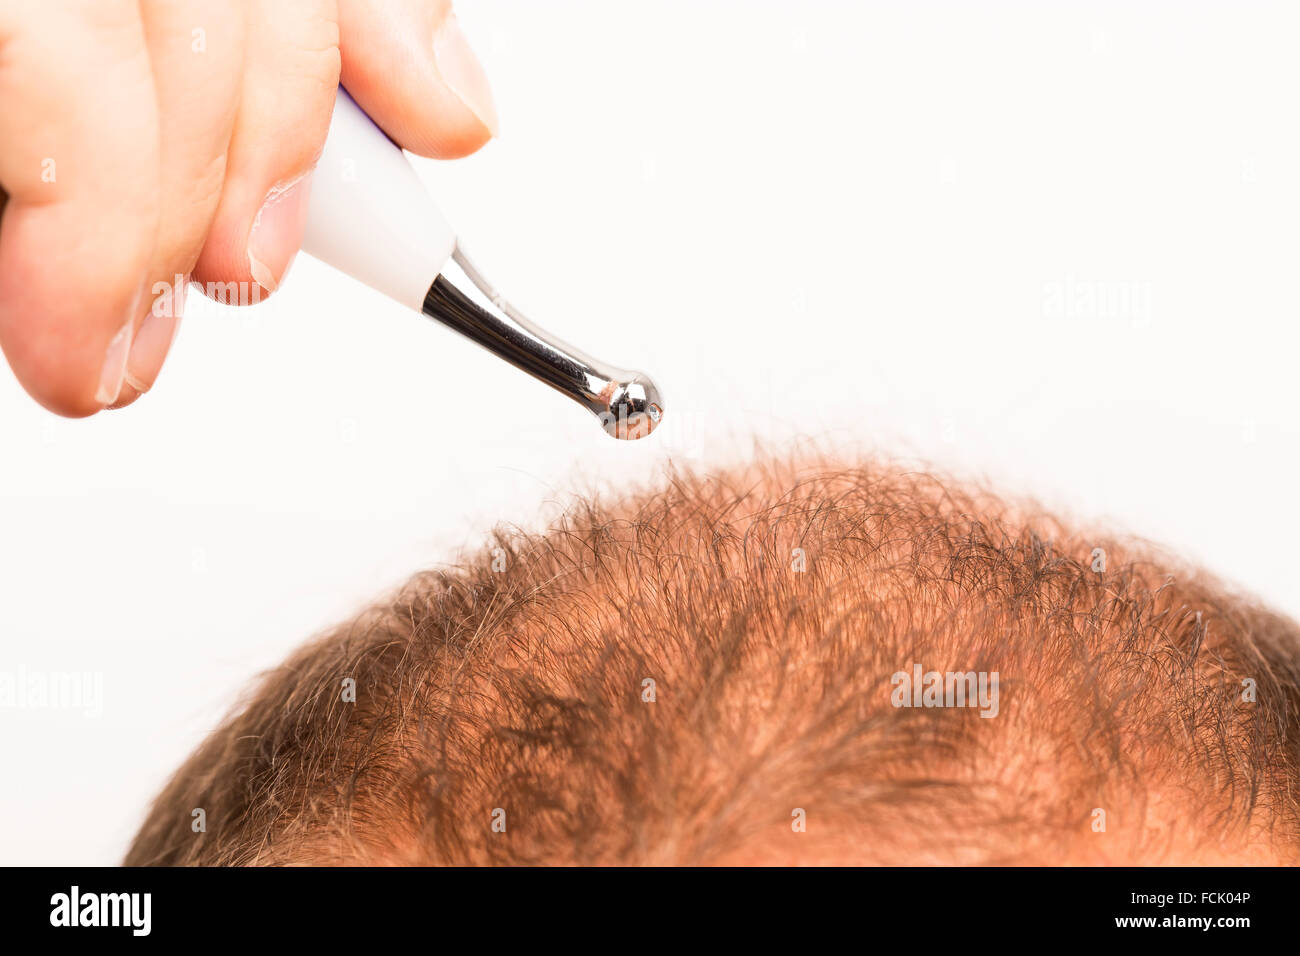 Man with a premature and incipient baldness Stock Photo